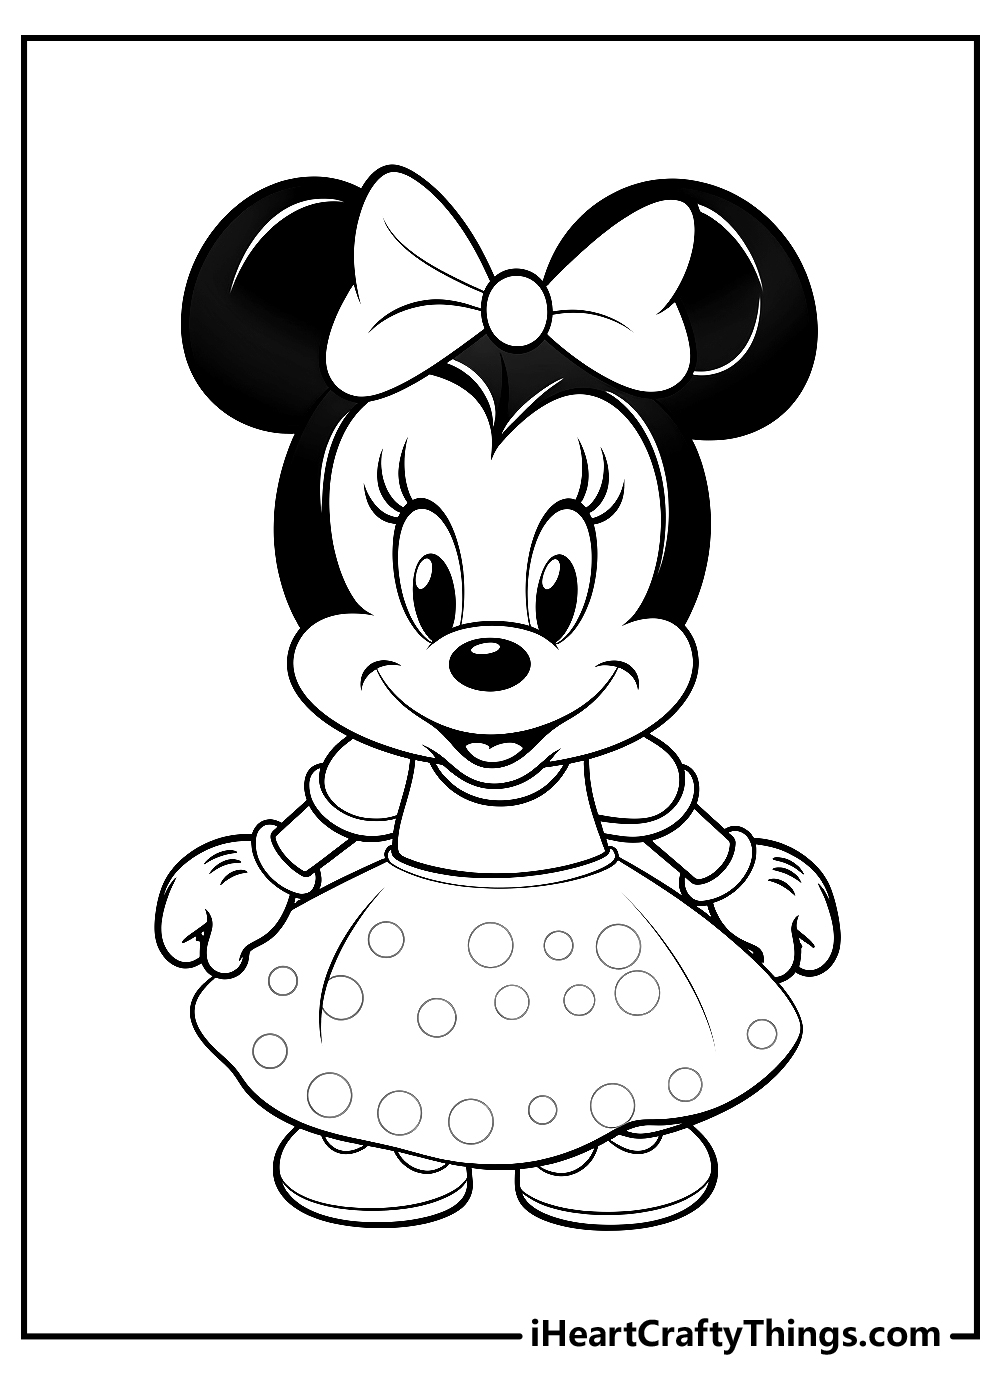 Minnie mouse coloring sheet free download